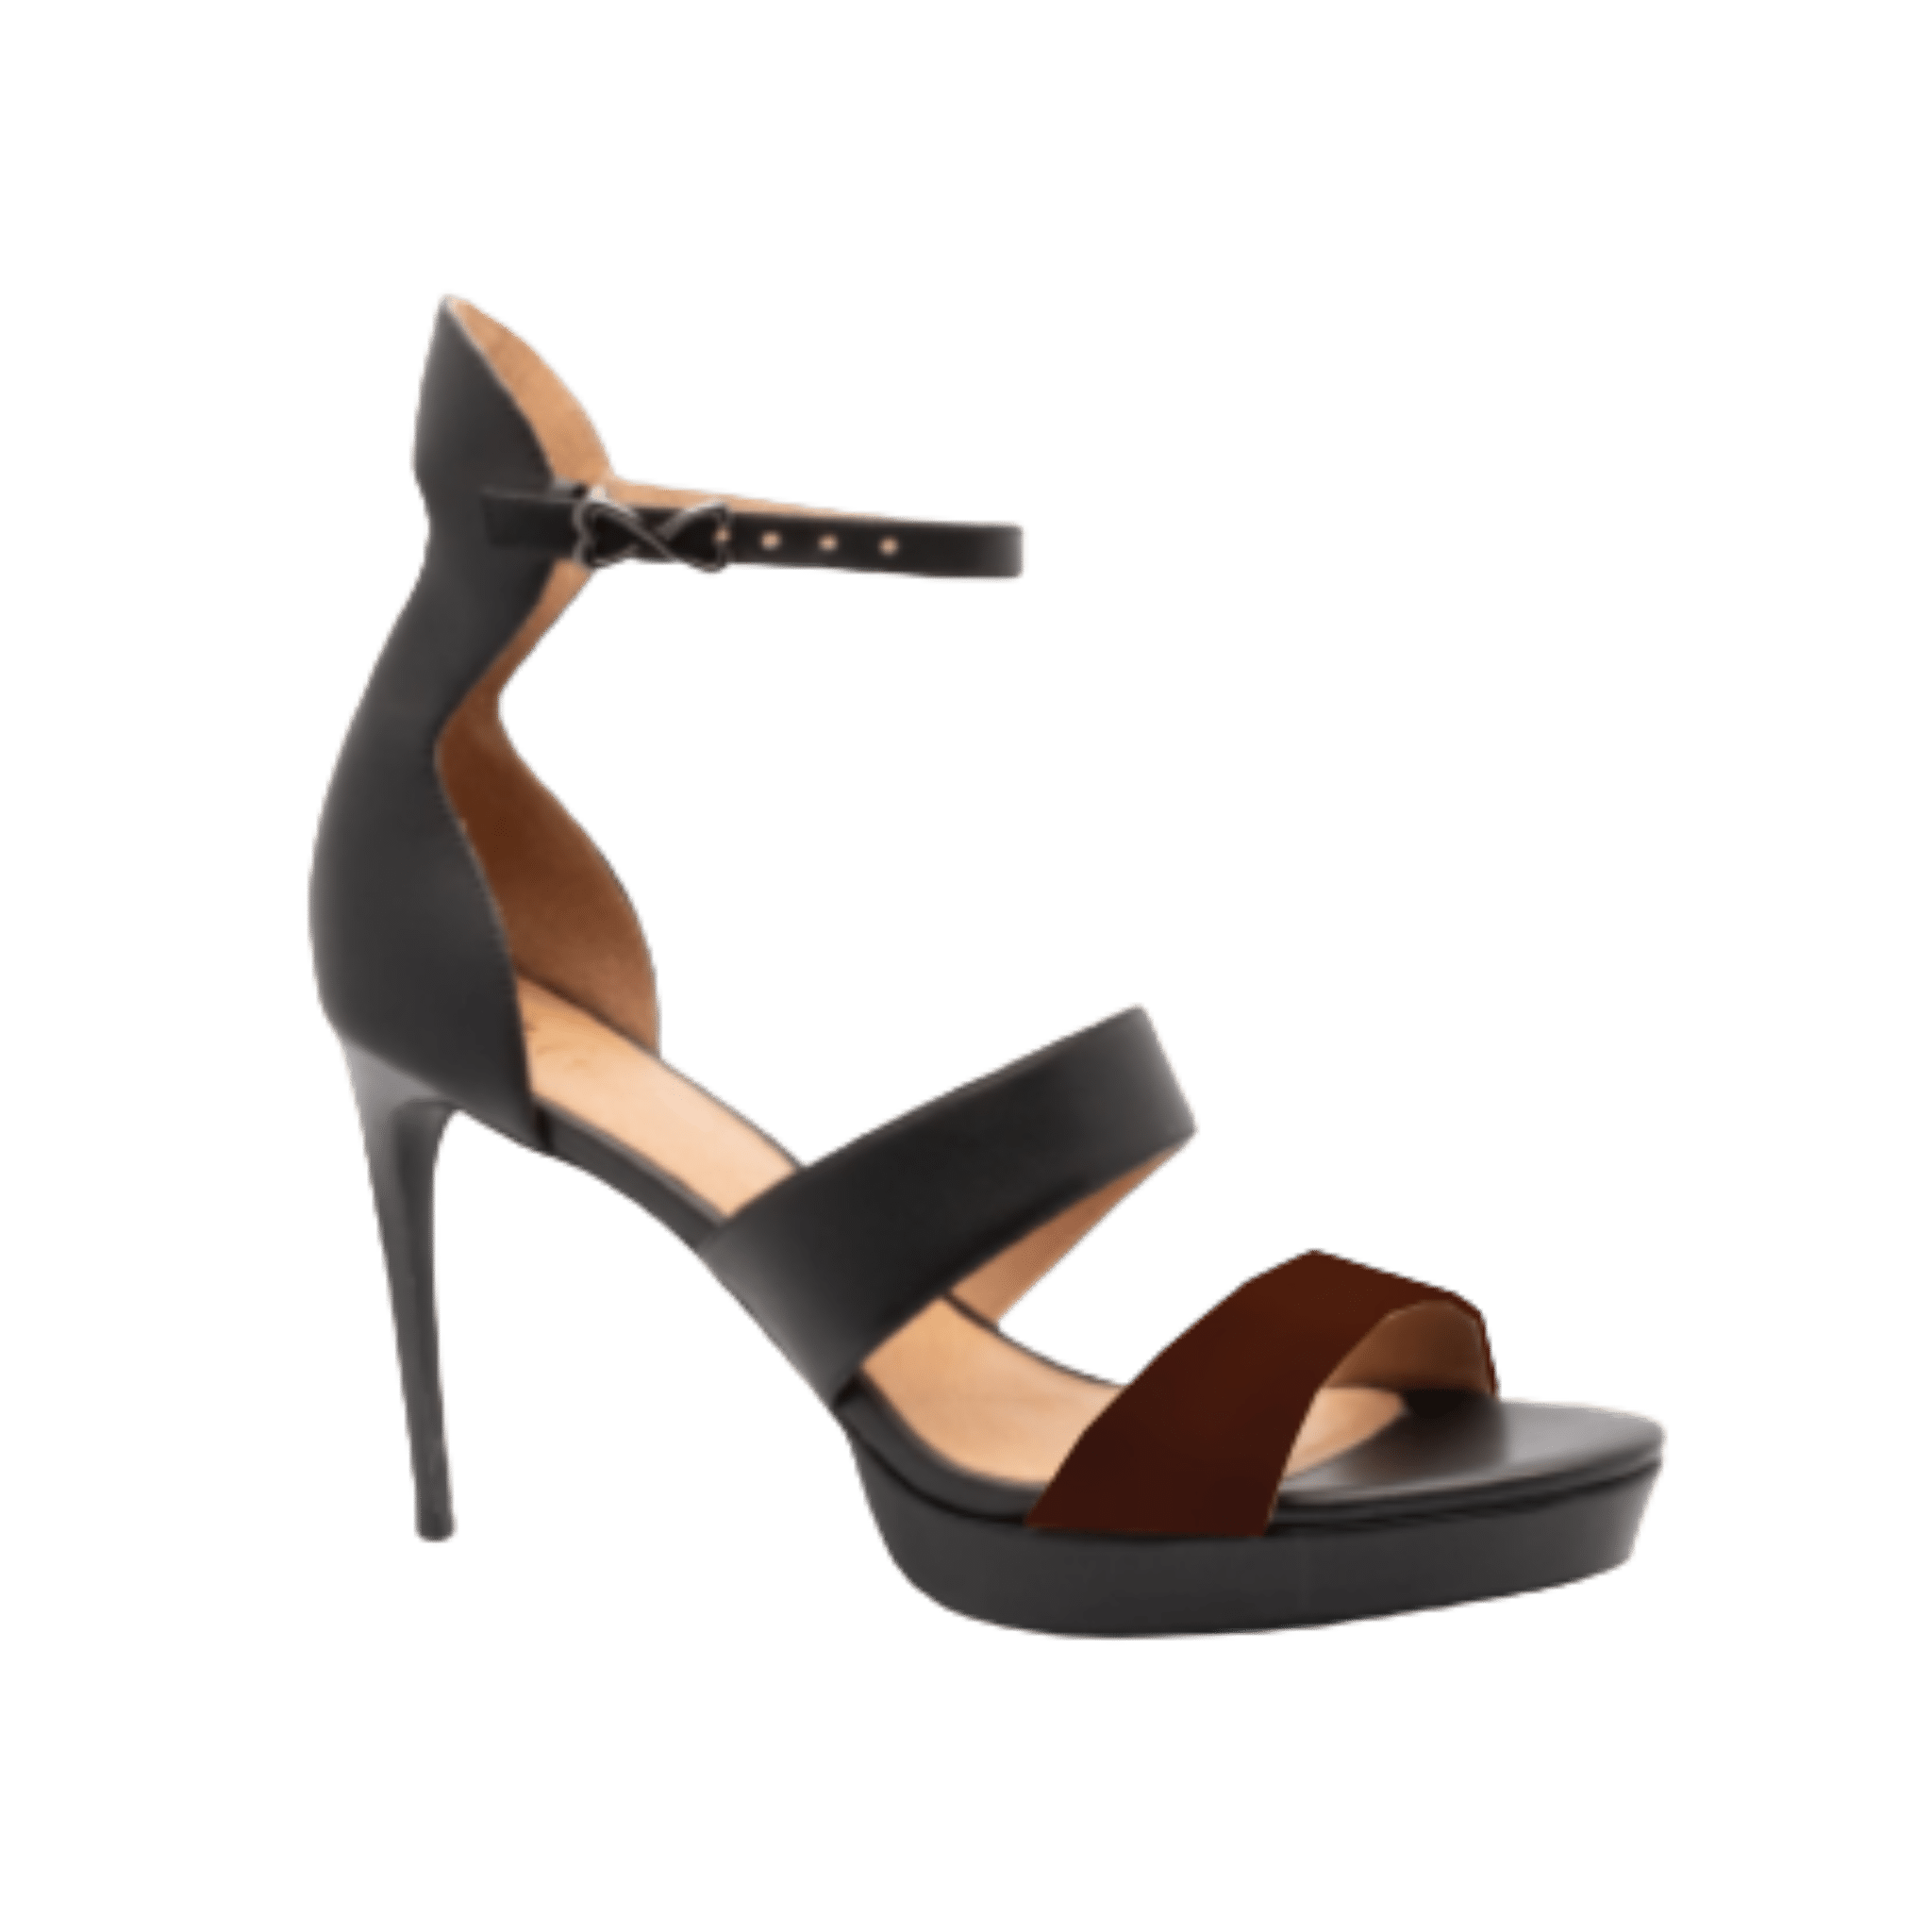 brown two tone leather sandal heel large sizes